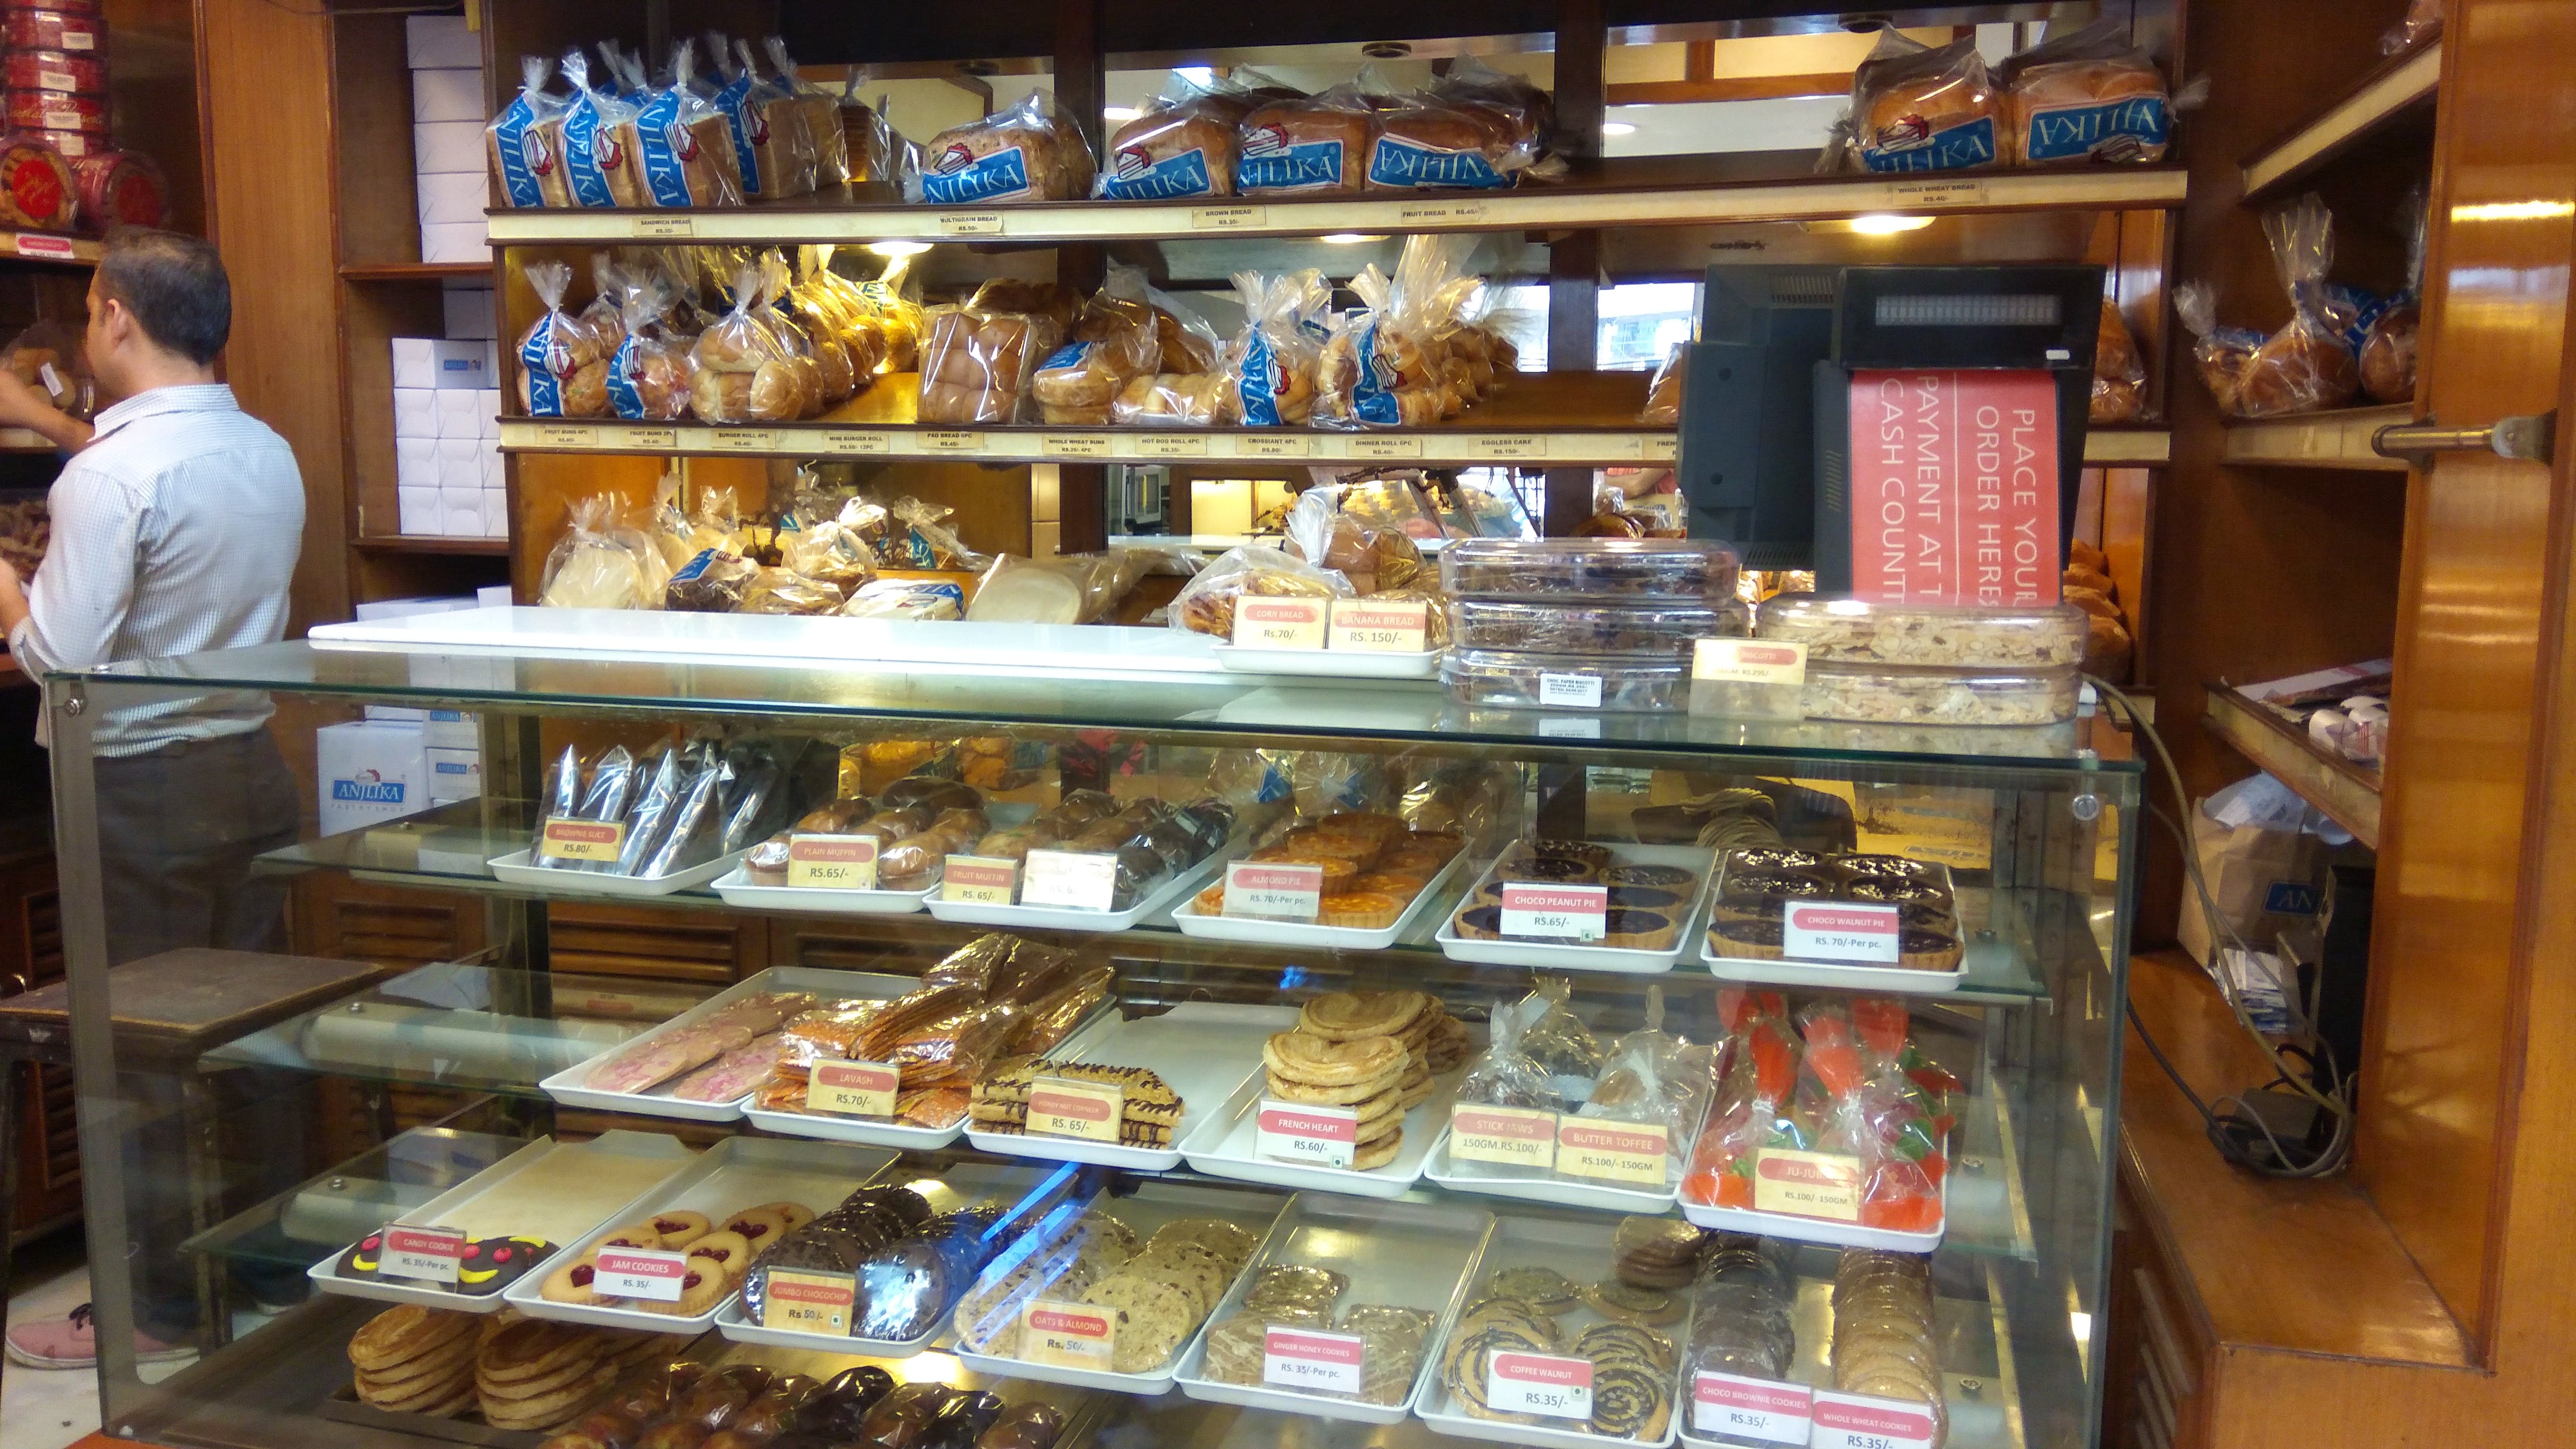 Bakery,Delicatessen,Retail,Grocery store,Convenience food,Building,Food,Snack,Pastry,Convenience store